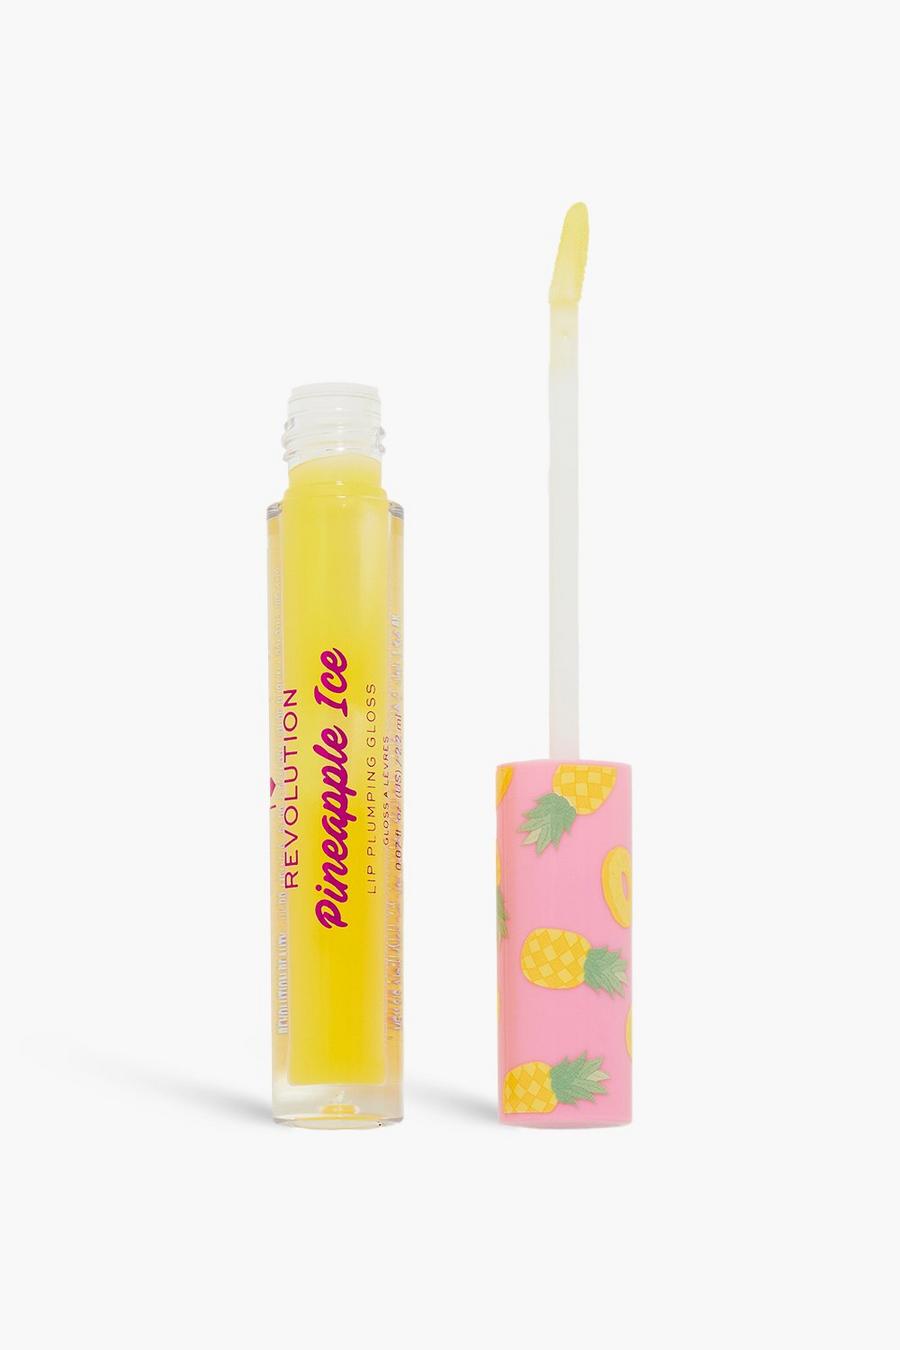 Clear I Heart Revolution Tasty Pineapple Ice Plumping Gloss Läppglans - Freeze image number 1